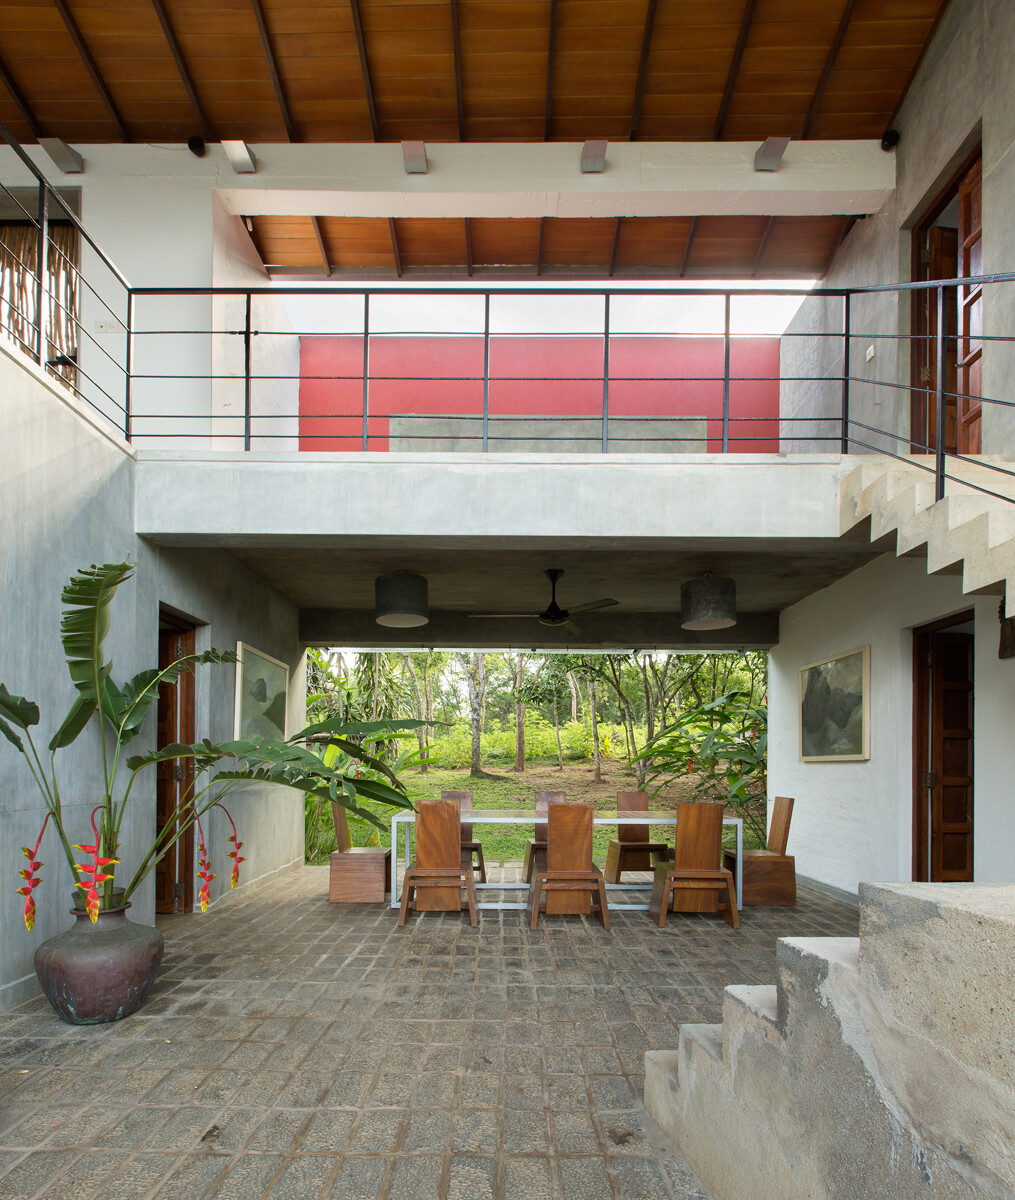 This Sri Lankan Beach Villa is Serene, Relaxed and Intimate (19)